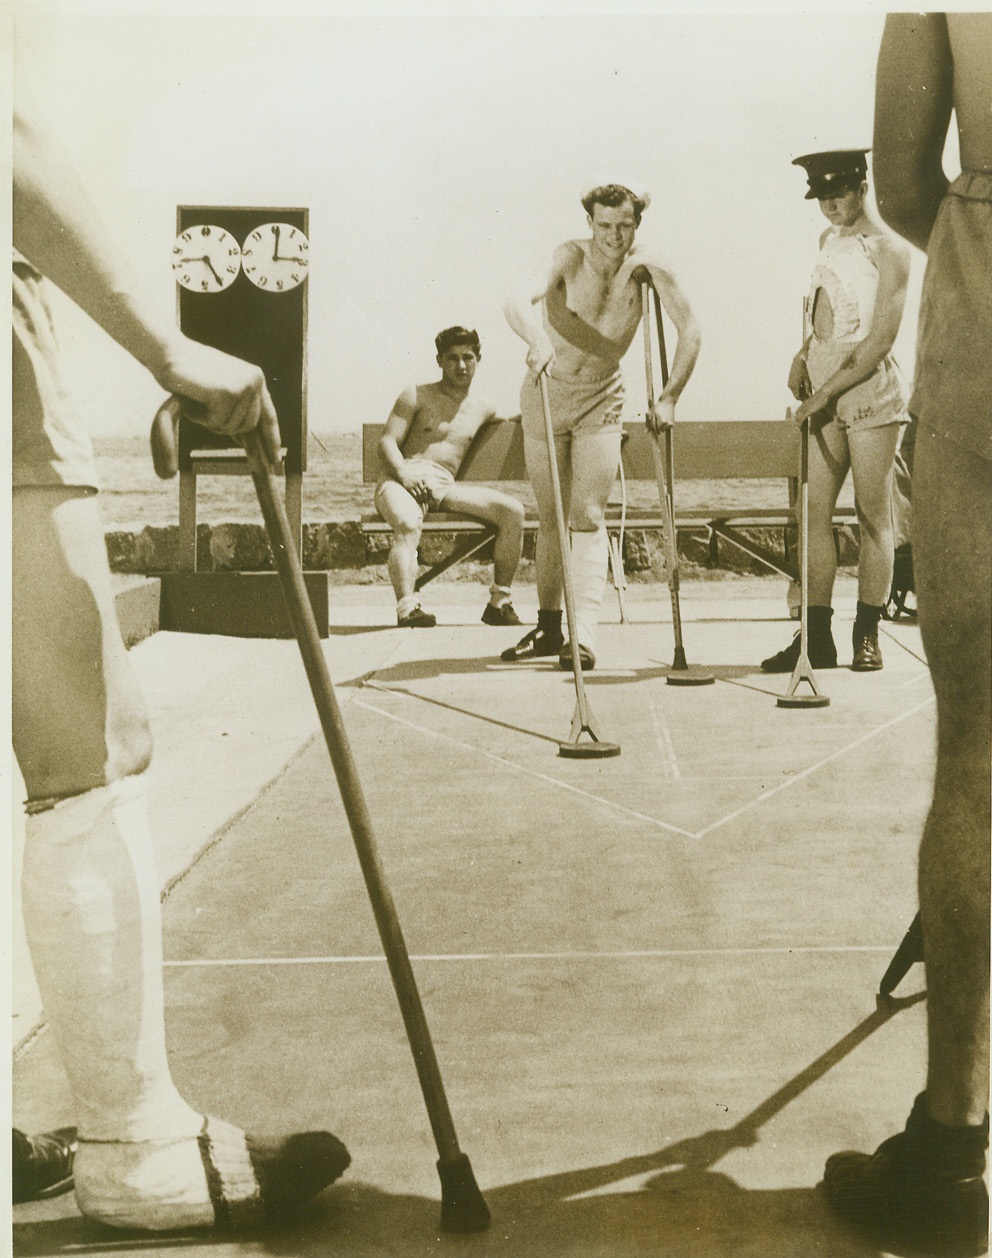 Crutches and Canes and Shuffleboard, 6/4/1943. San Diego, Calif.—Takes more than crutches and canes to sink the morale of Uncle Sam’s gobs. In spite of their injuries, these boys enjoy a game of shuffleboard during an outing for patients of the San Diego Naval Hospital. M.R. McConnell, shipfitter third class, leans on his crutch as he sends a disc down the deck. Credit: Official U.S. Navy photo from ACME.;